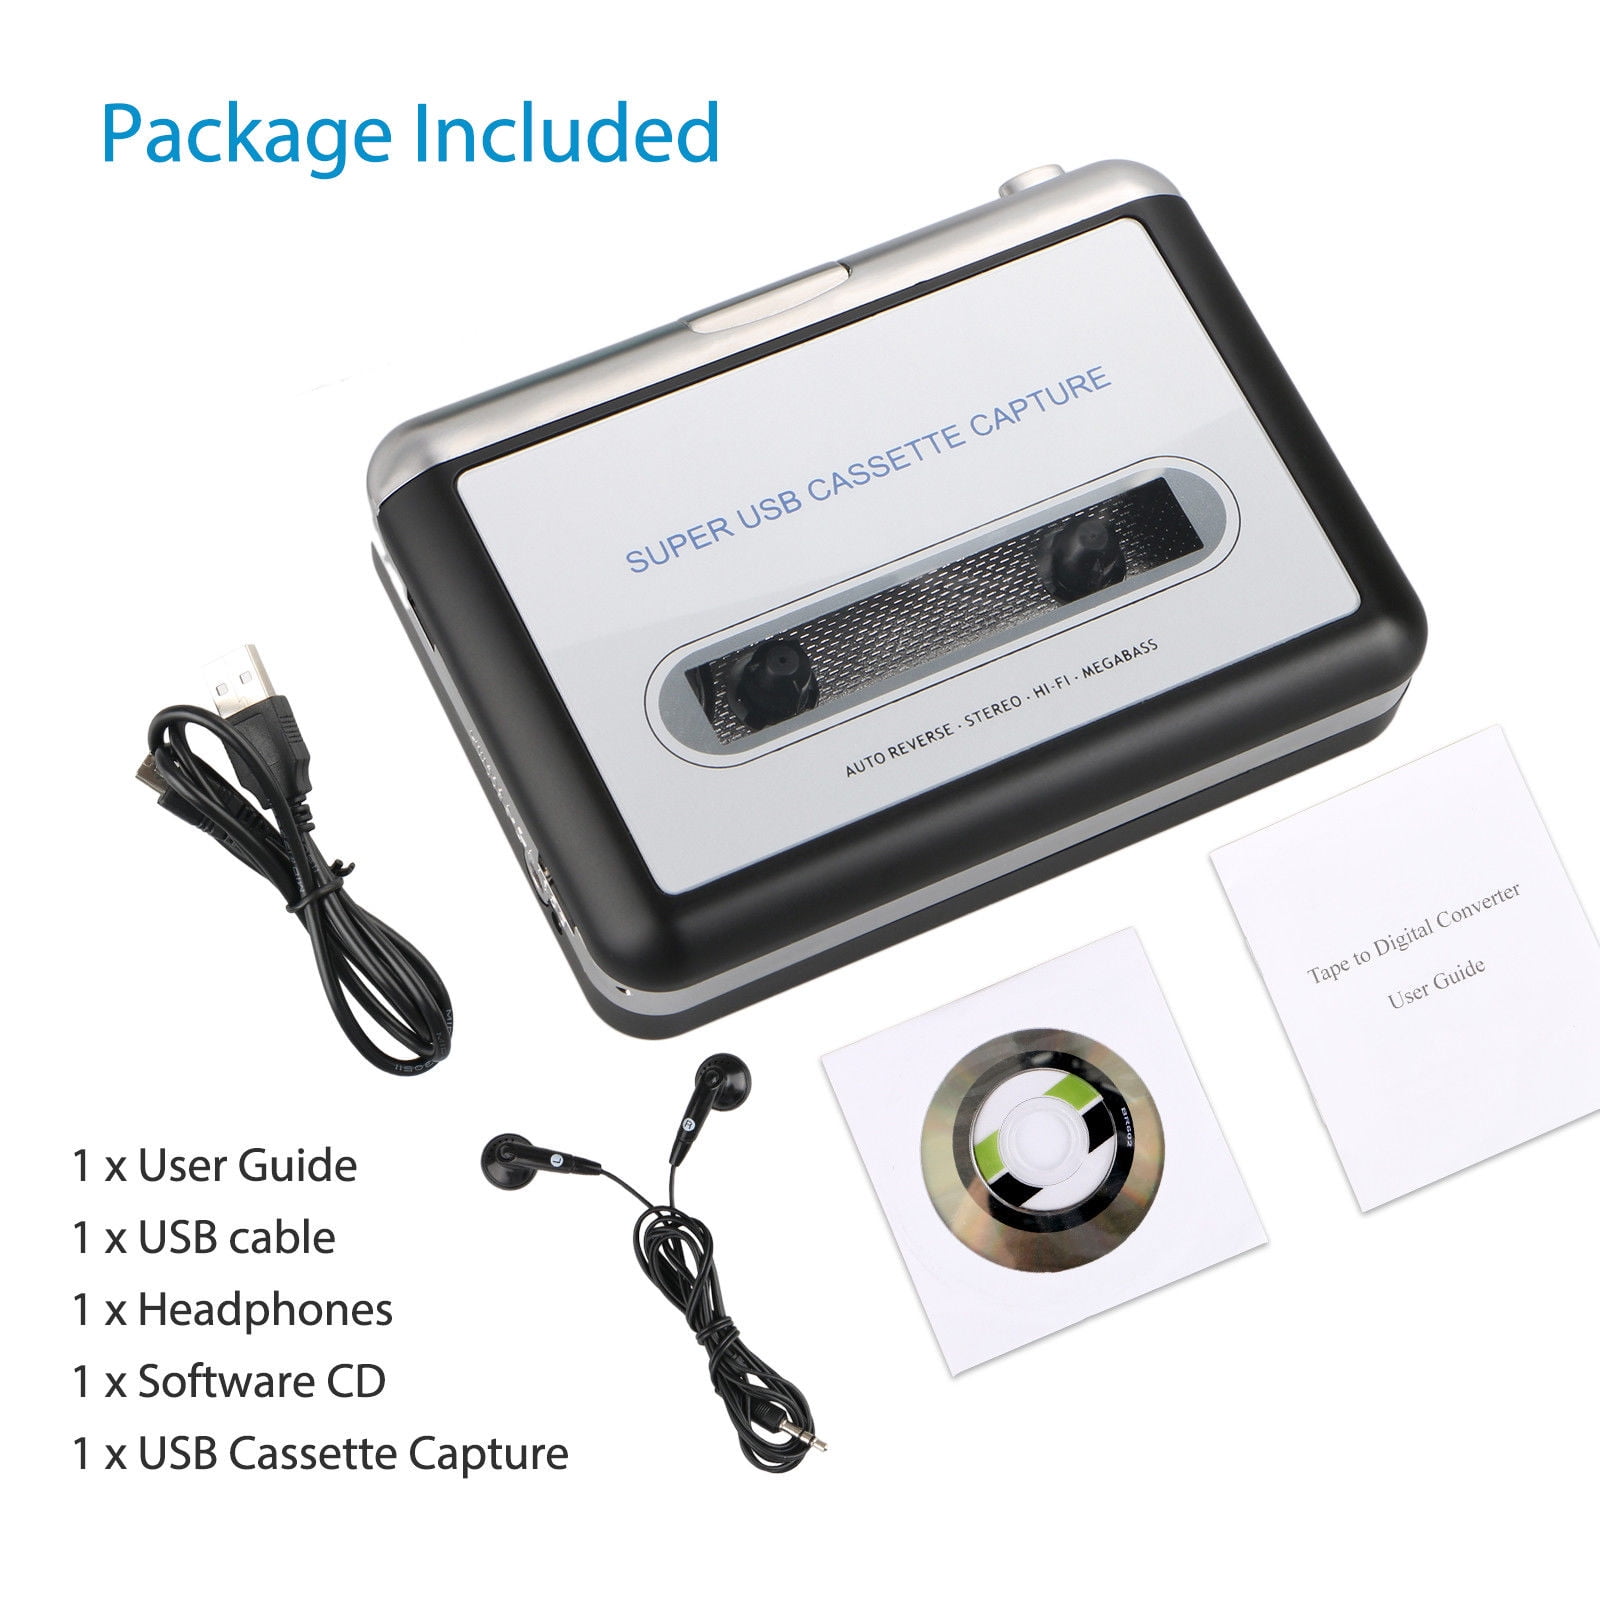 CCHKFEI Cassette Player Portable Tape to PC Converter USB Cassette Recorder Tape-to-MP3 Music Player Convert Tape Cassettes to MP3 CD/Analog Audio to Digital Format 